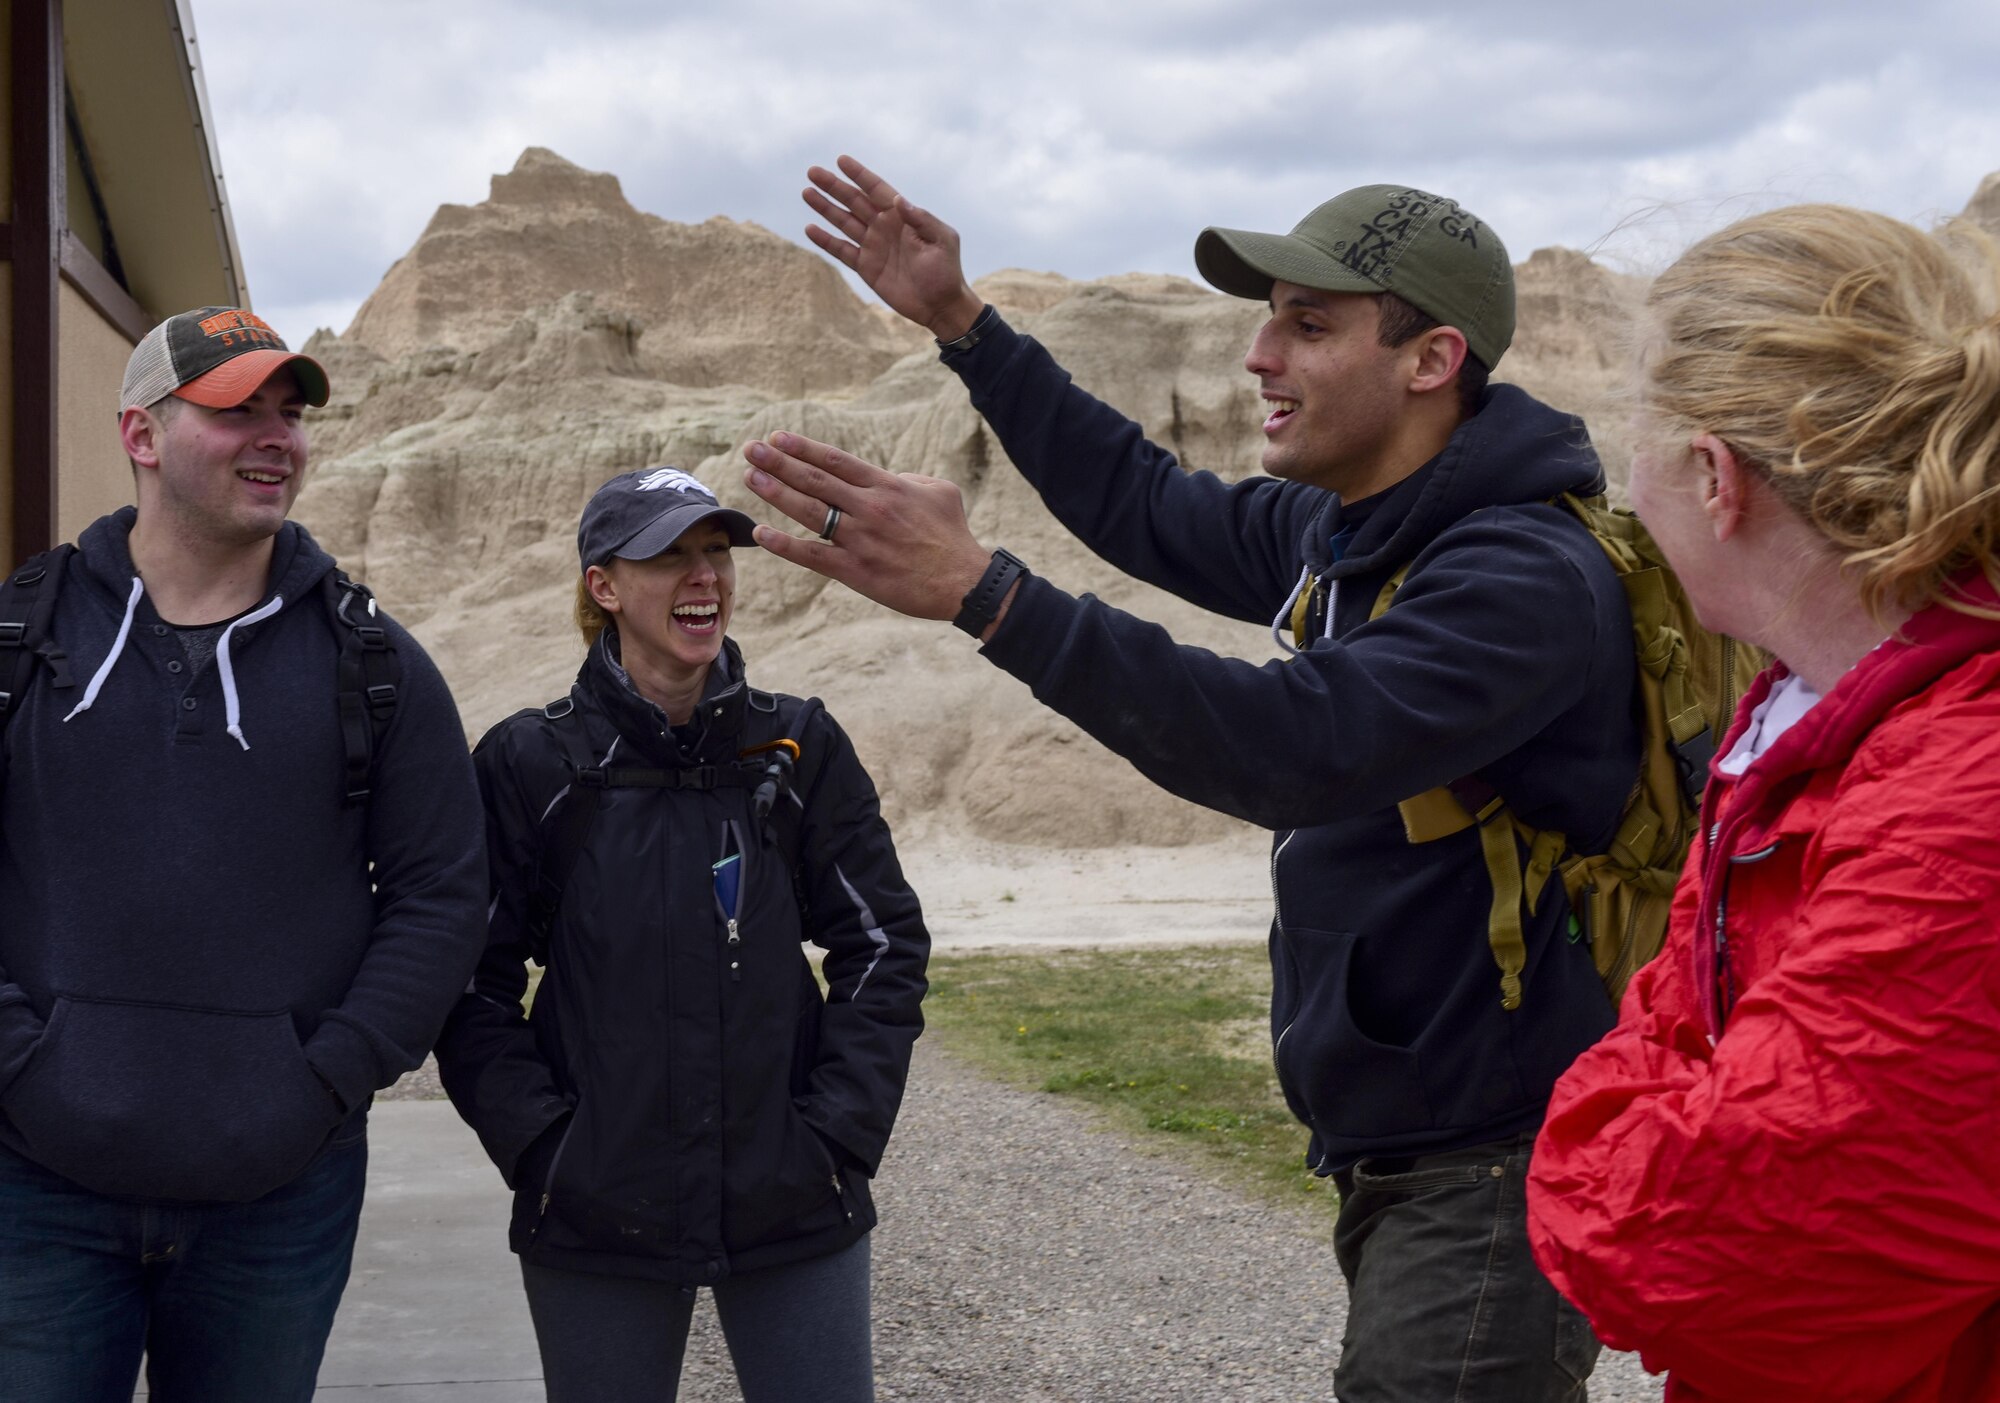 Airmen trade stories after a hike through the Badlands National Park, S.D., April 28, 2017. The hike was one of several activities Ellsworth Airmen participated in during a semi-annual Wingman Day that focused on improving Airmen both physically and socially. (U.S. Air Force photo by Airman 1st Class Randahl J. Jenson)